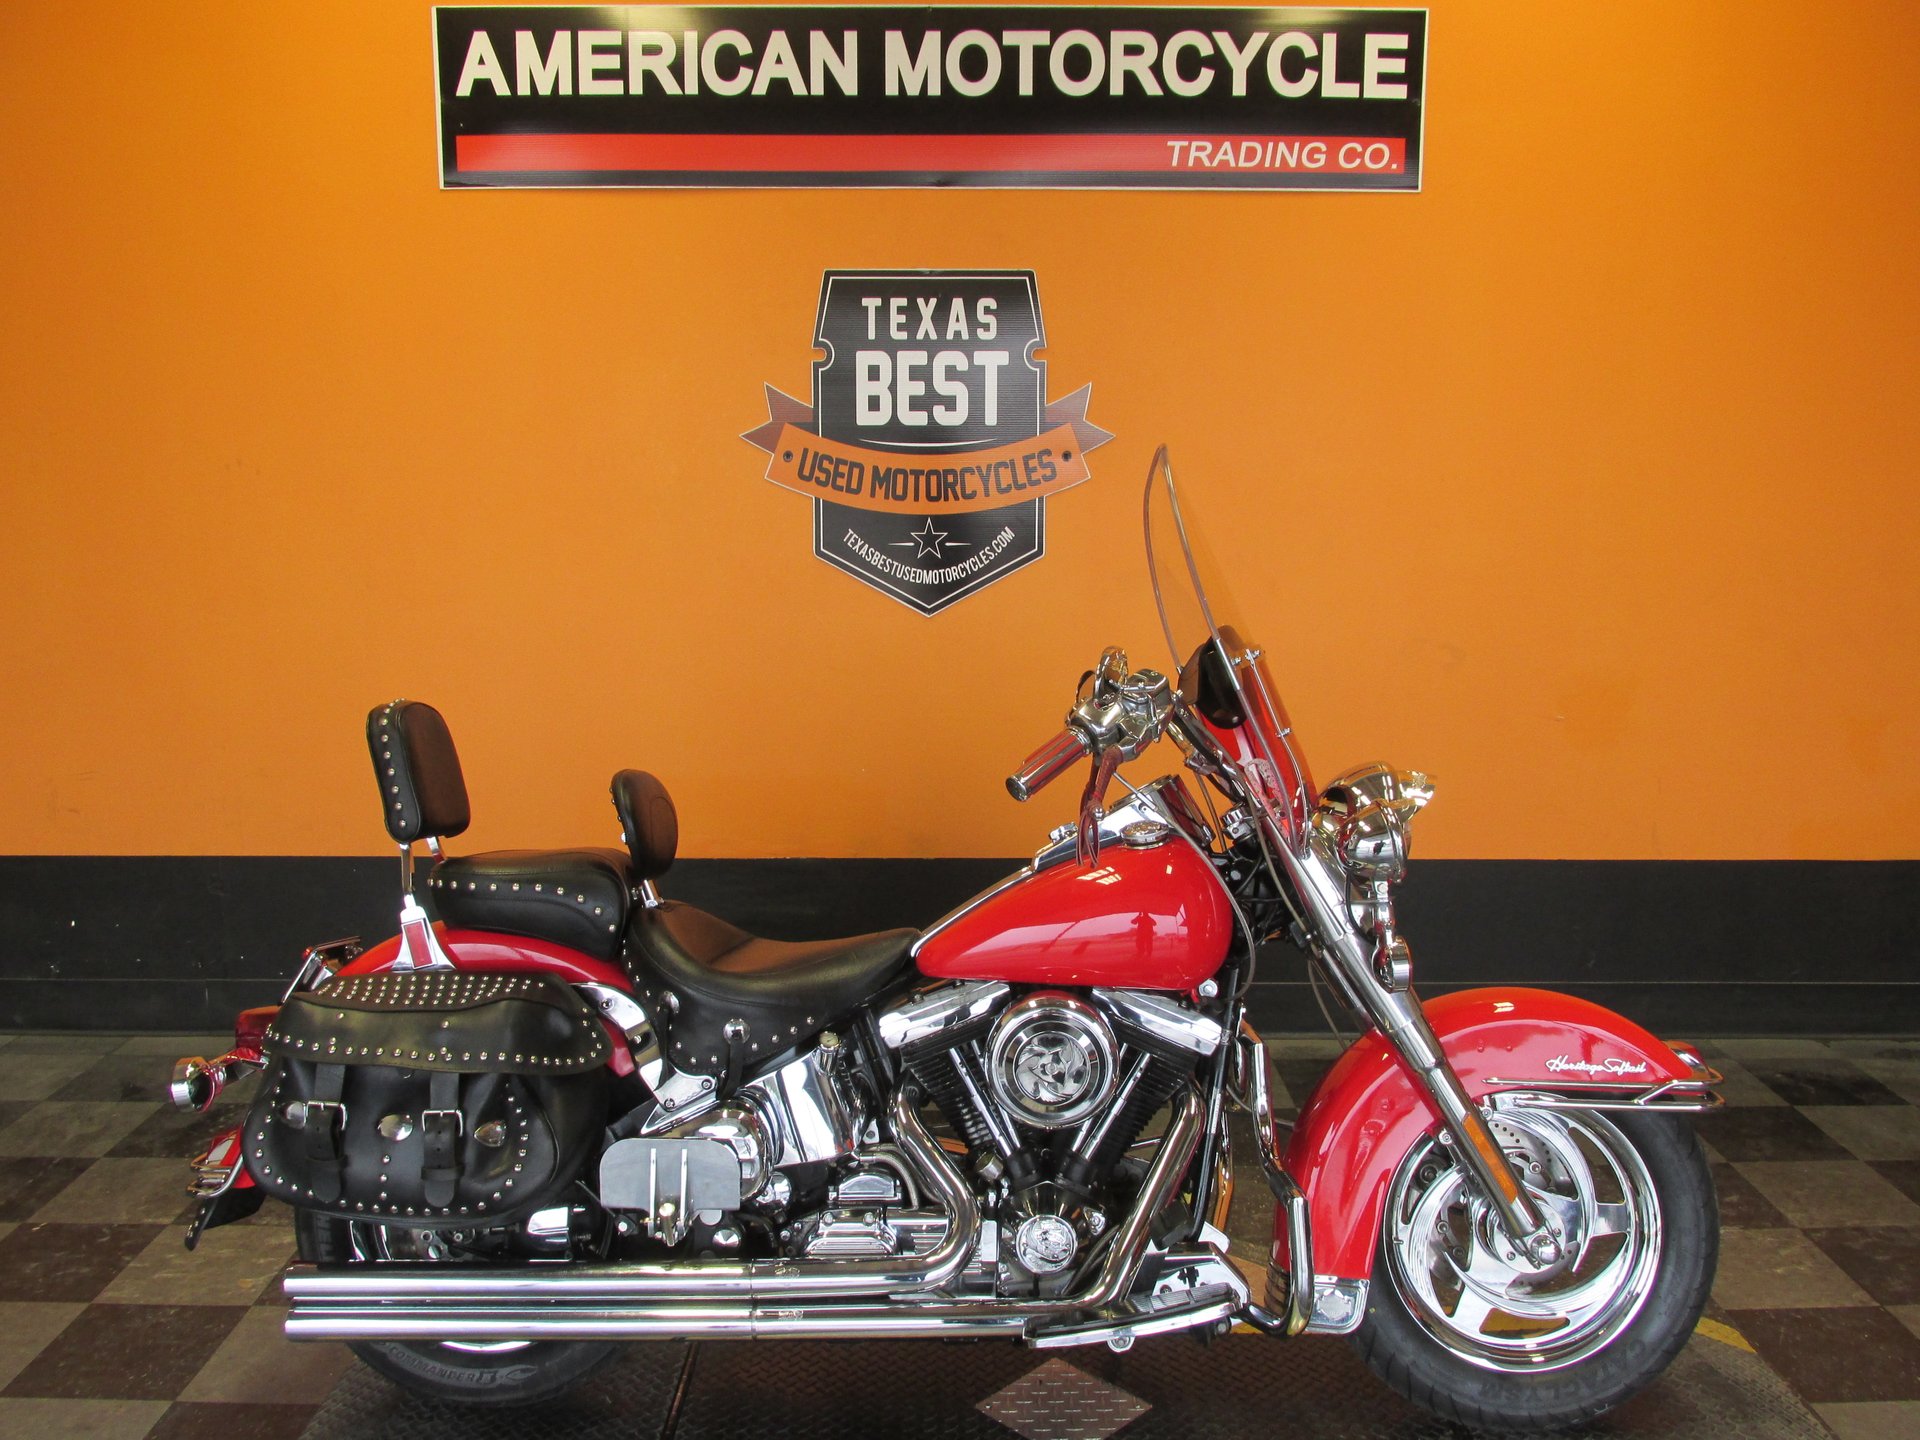 1991 Harley Davidson Softail Heritage Classic American Motorcycle Trading Company Used Harley Davidson Motorcycles